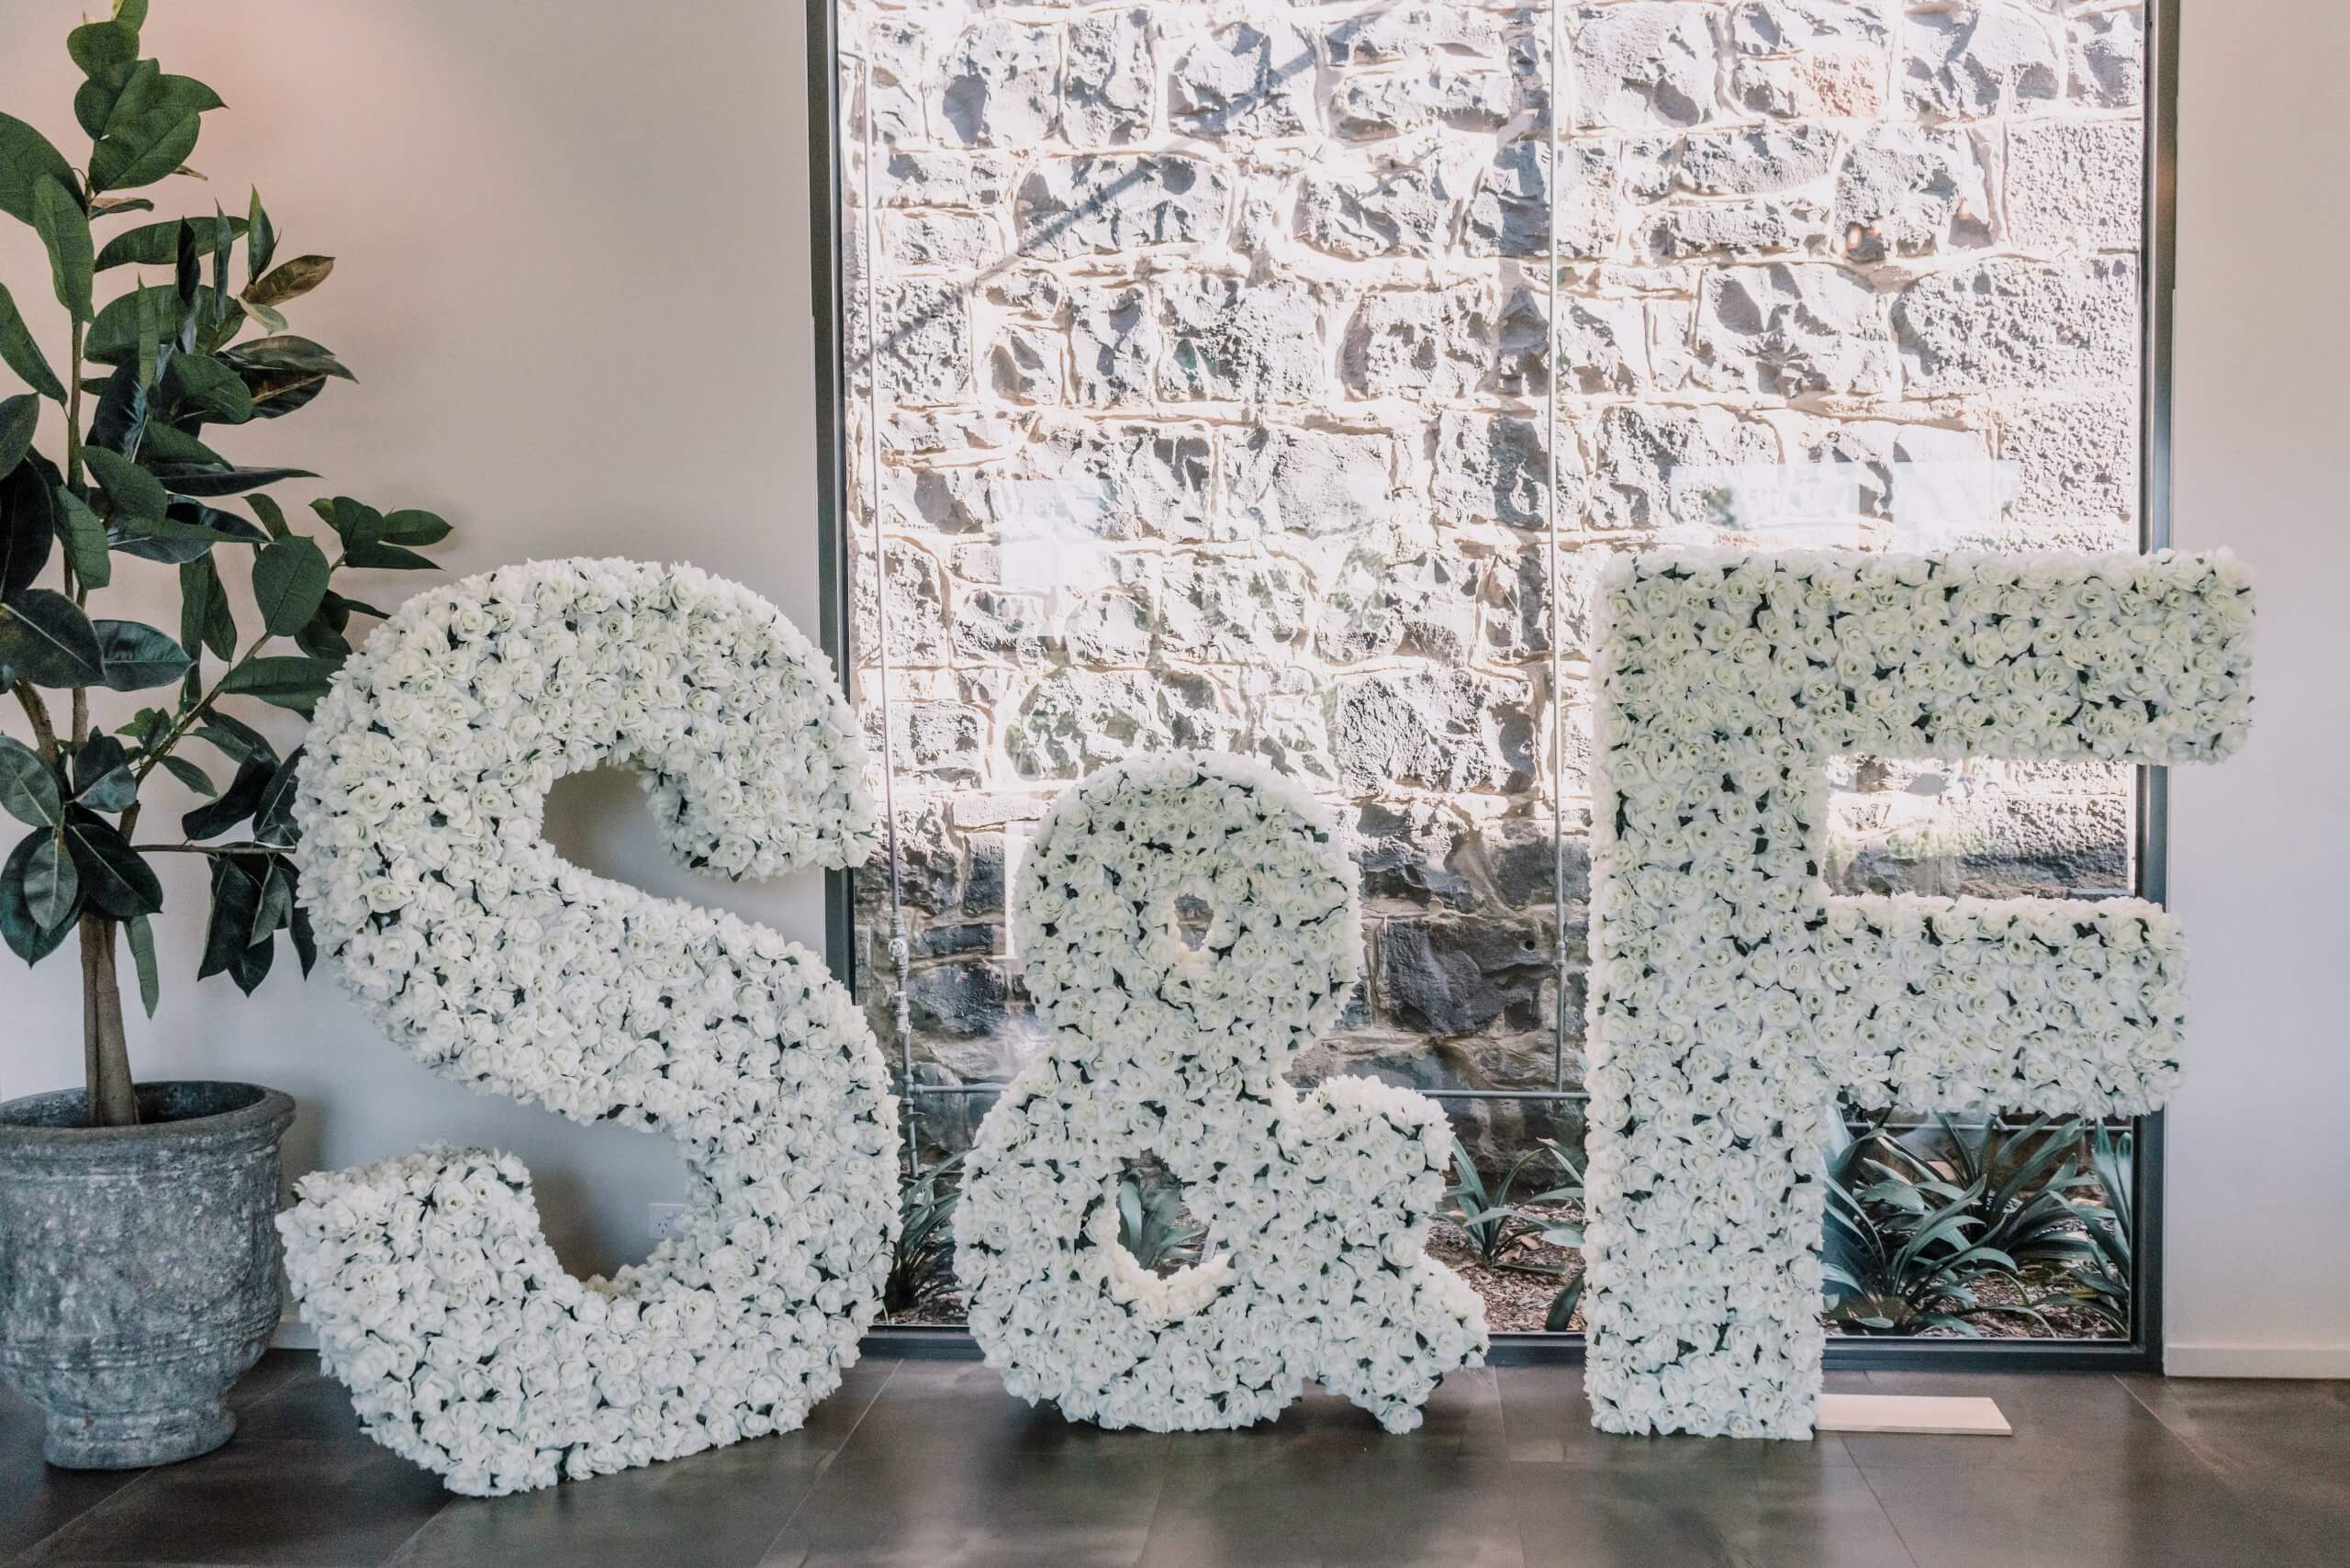 Big letters made of flowers at S & F's wedding.